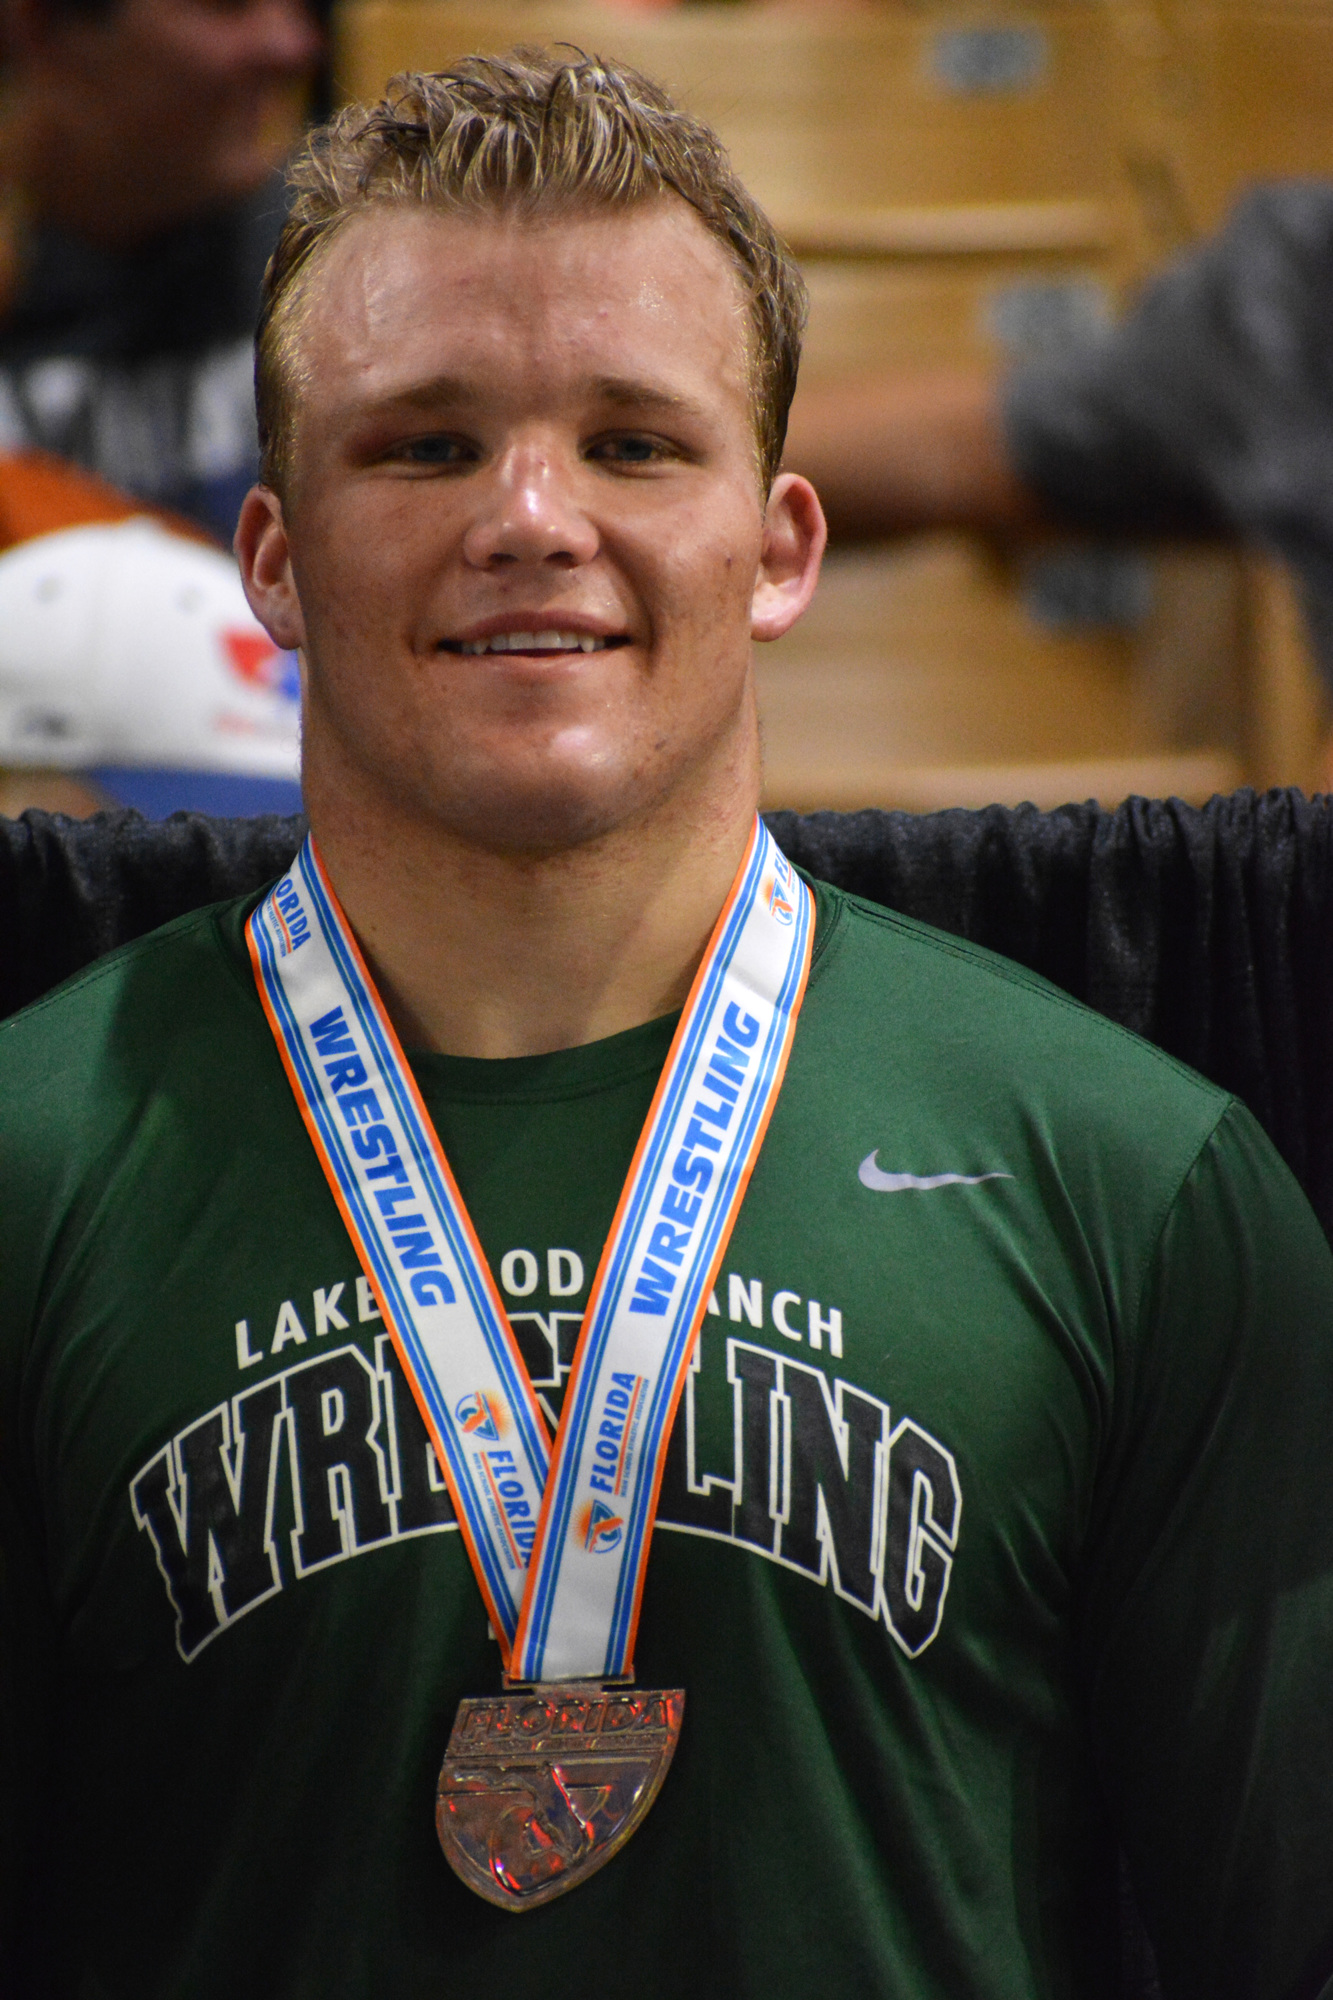 Lakewood Ranch senior Chase Sharp grins after receiving his silver medal.